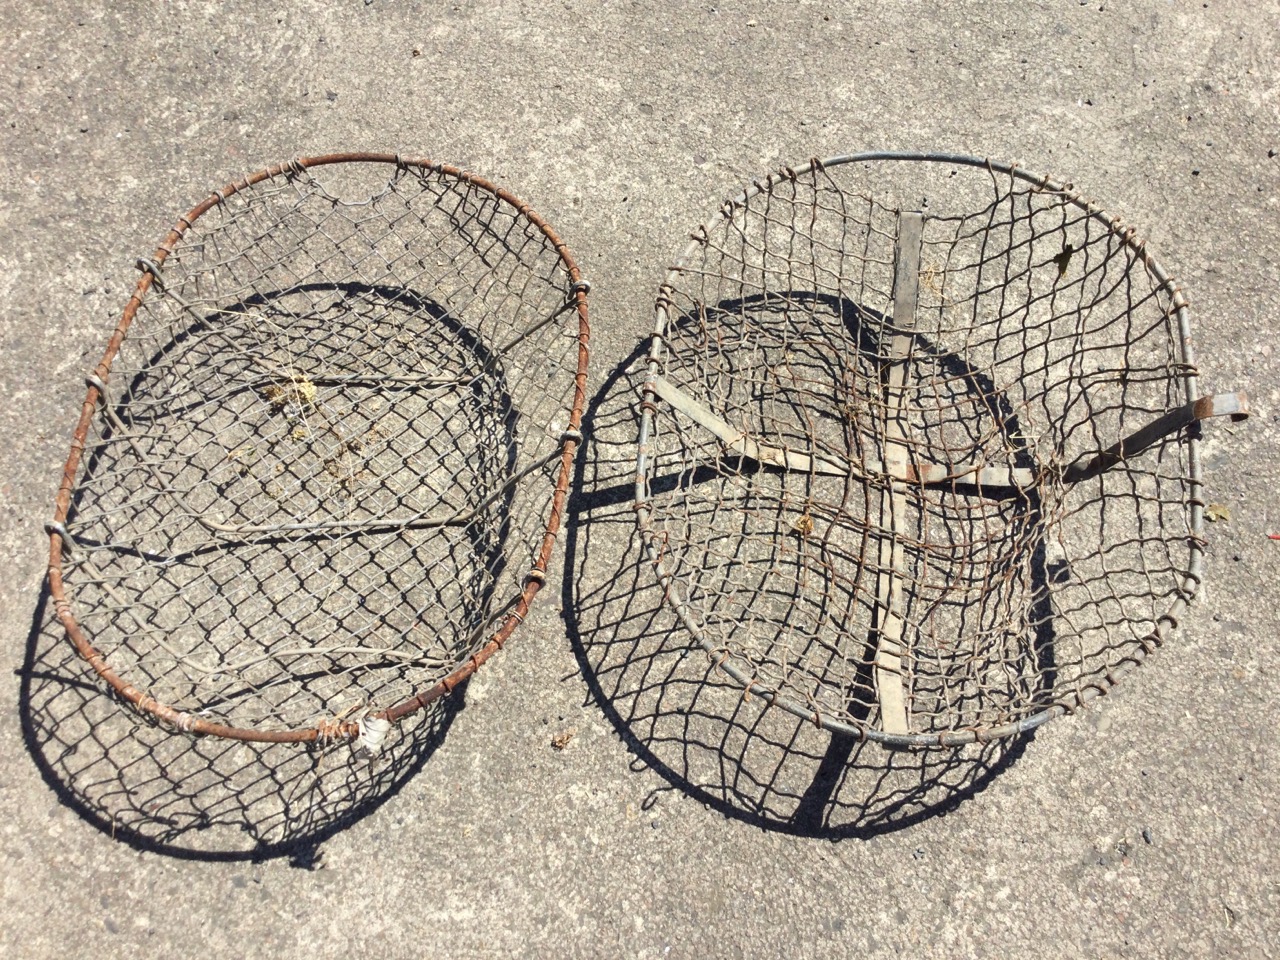 Twenty-two oval mesh potato cage baskets, each with hand-hole apertures to side rims. (22) - Image 2 of 3